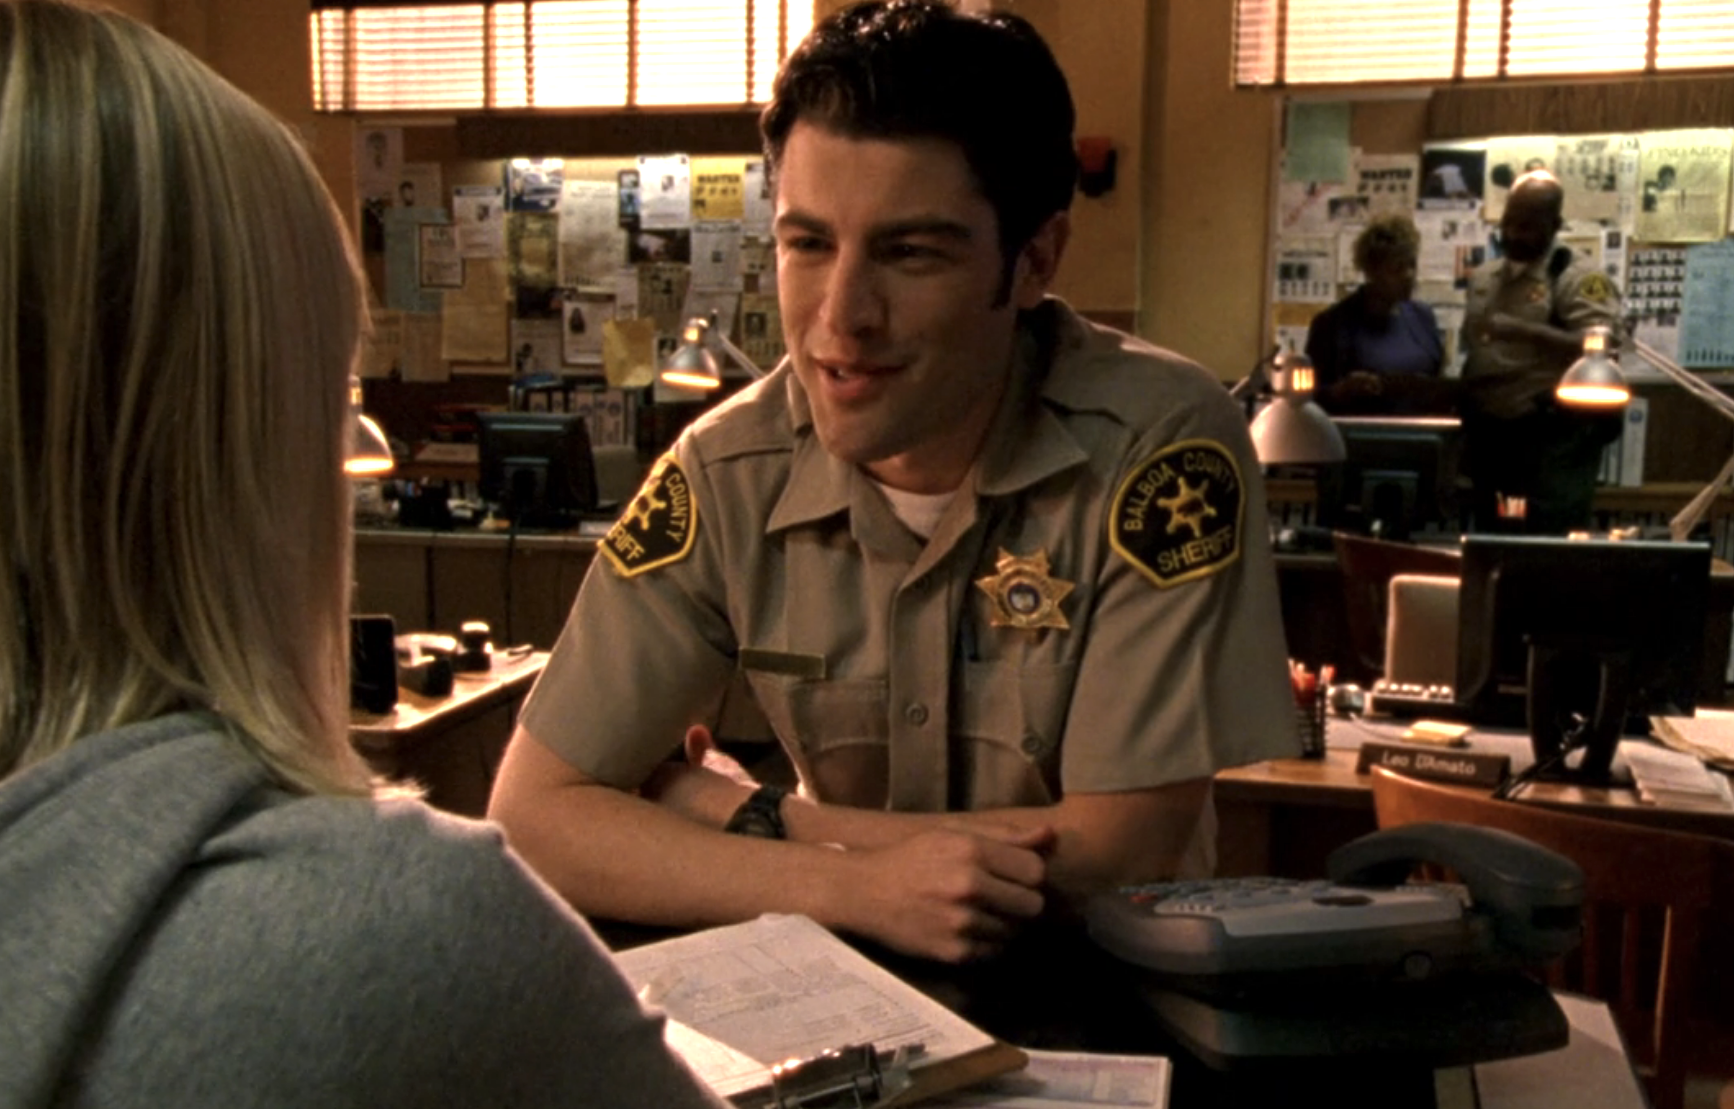 Screenshot from Veronica Mars S1E19. A white man in a sheriff deputy uniform, Leo, is leaning on a counter smiling.